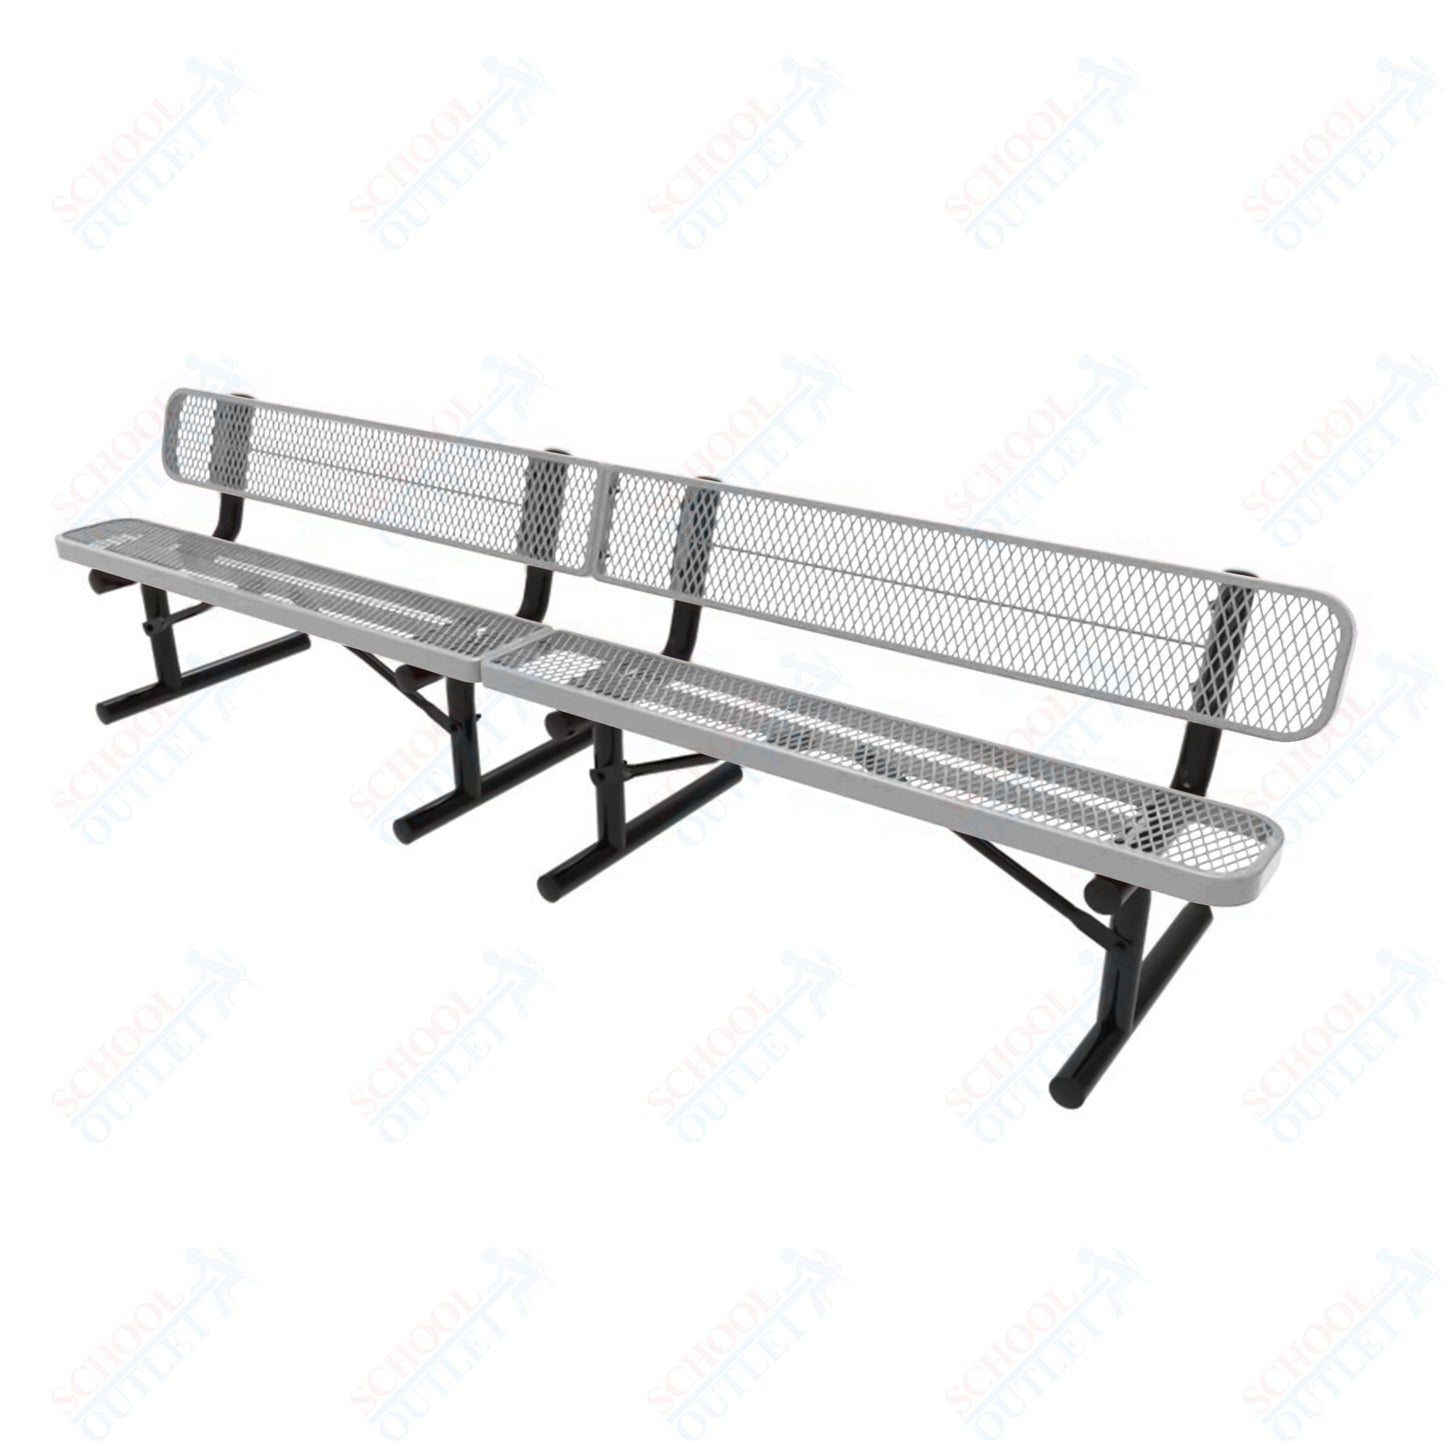 MyTcoat - Standard Portable Outdoor Bench with Back 10' L (MYT-BRT10-18)